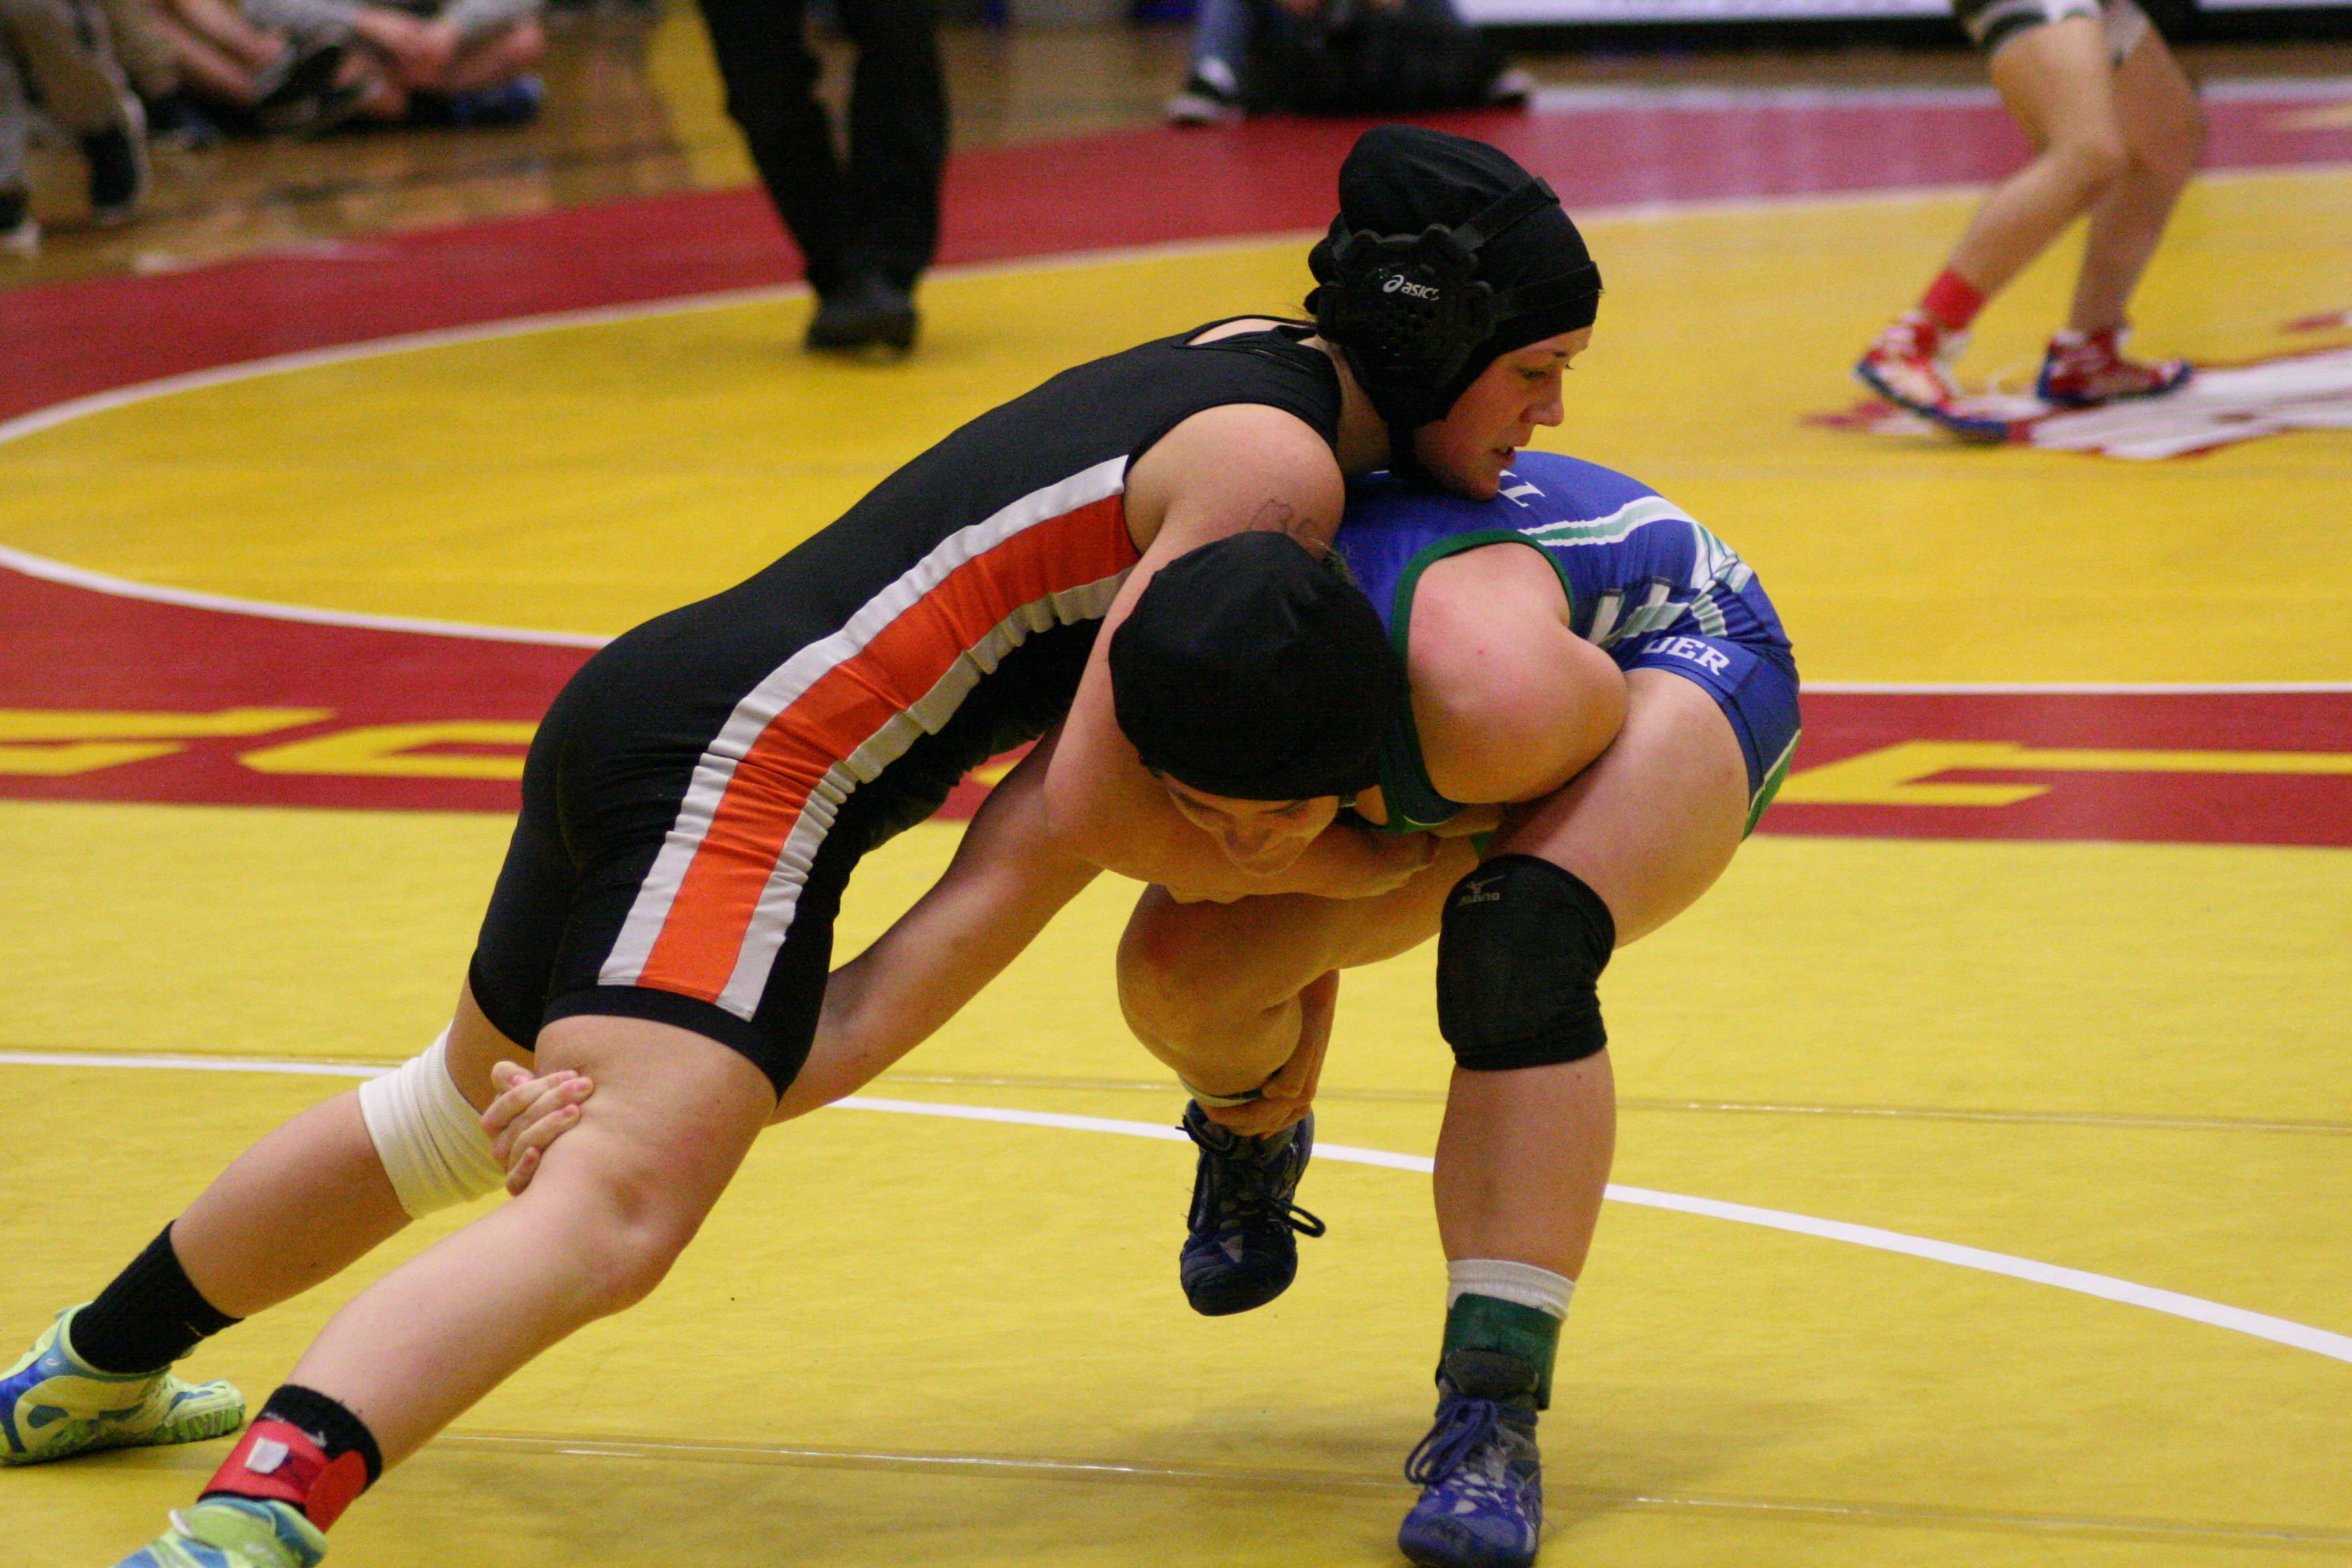 Washougal sophomore Morgan Ratcliff overpowers her opponent from Mountain View in the 135-pound county championship match.